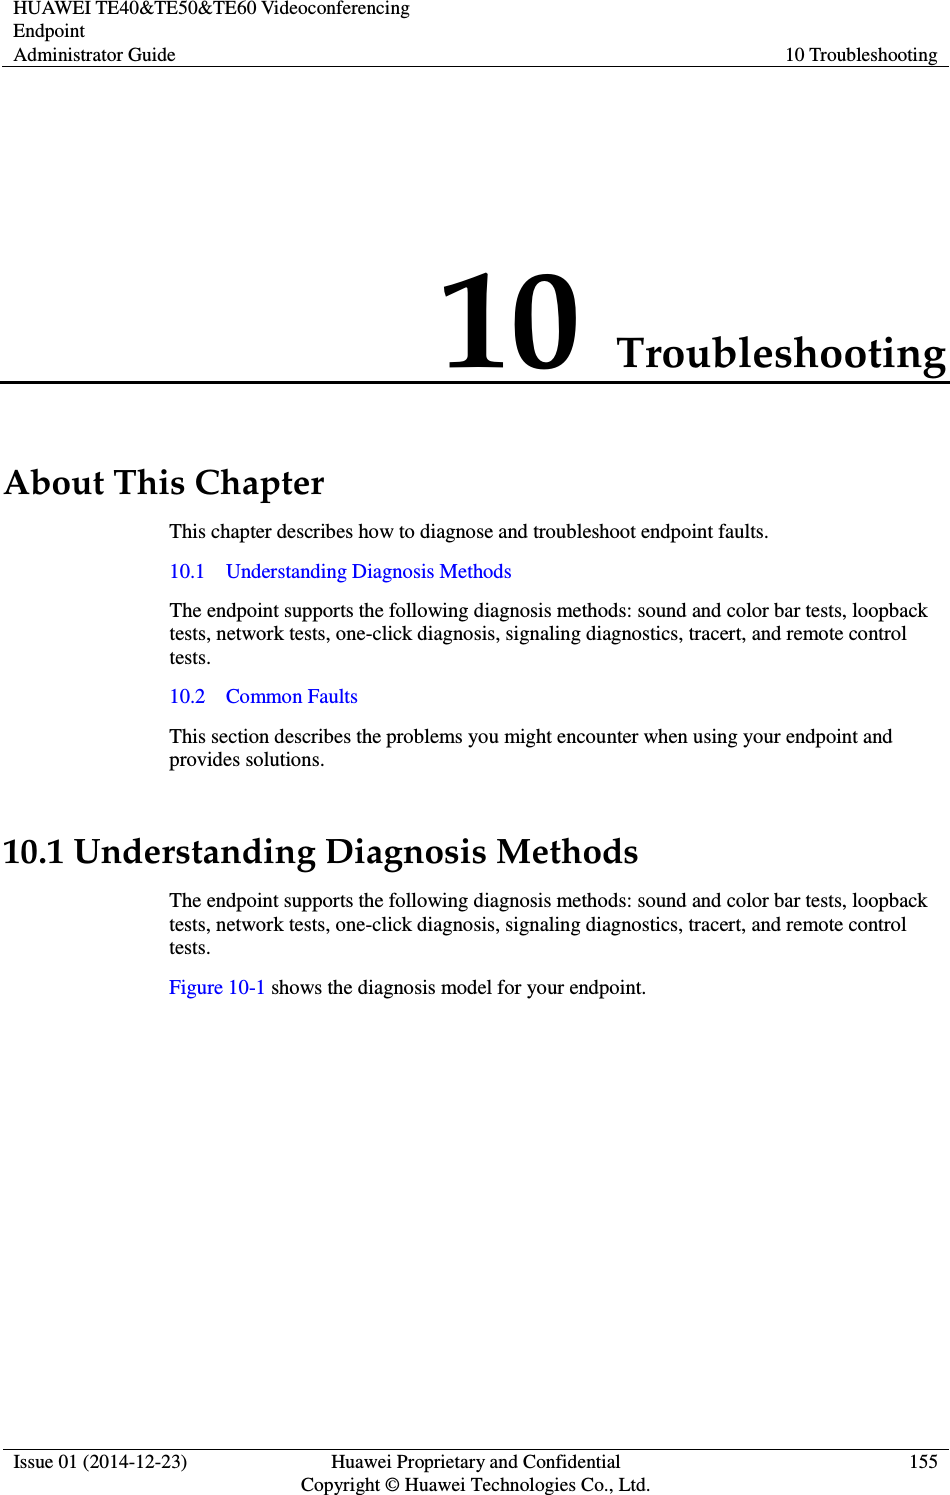 HUAWEI TE40&amp;TE50&amp;TE60 Videoconferencing Endpoint Administrator Guide  10 Troubleshooting  Issue 01 (2014-12-23)  Huawei Proprietary and Confidential                                     Copyright © Huawei Technologies Co., Ltd. 155  10 Troubleshooting About This Chapter This chapter describes how to diagnose and troubleshoot endpoint faults. 10.1    Understanding Diagnosis Methods The endpoint supports the following diagnosis methods: sound and color bar tests, loopback tests, network tests, one-click diagnosis, signaling diagnostics, tracert, and remote control tests. 10.2    Common Faults This section describes the problems you might encounter when using your endpoint and provides solutions. 10.1 Understanding Diagnosis Methods The endpoint supports the following diagnosis methods: sound and color bar tests, loopback tests, network tests, one-click diagnosis, signaling diagnostics, tracert, and remote control tests. Figure 10-1 shows the diagnosis model for your endpoint. 